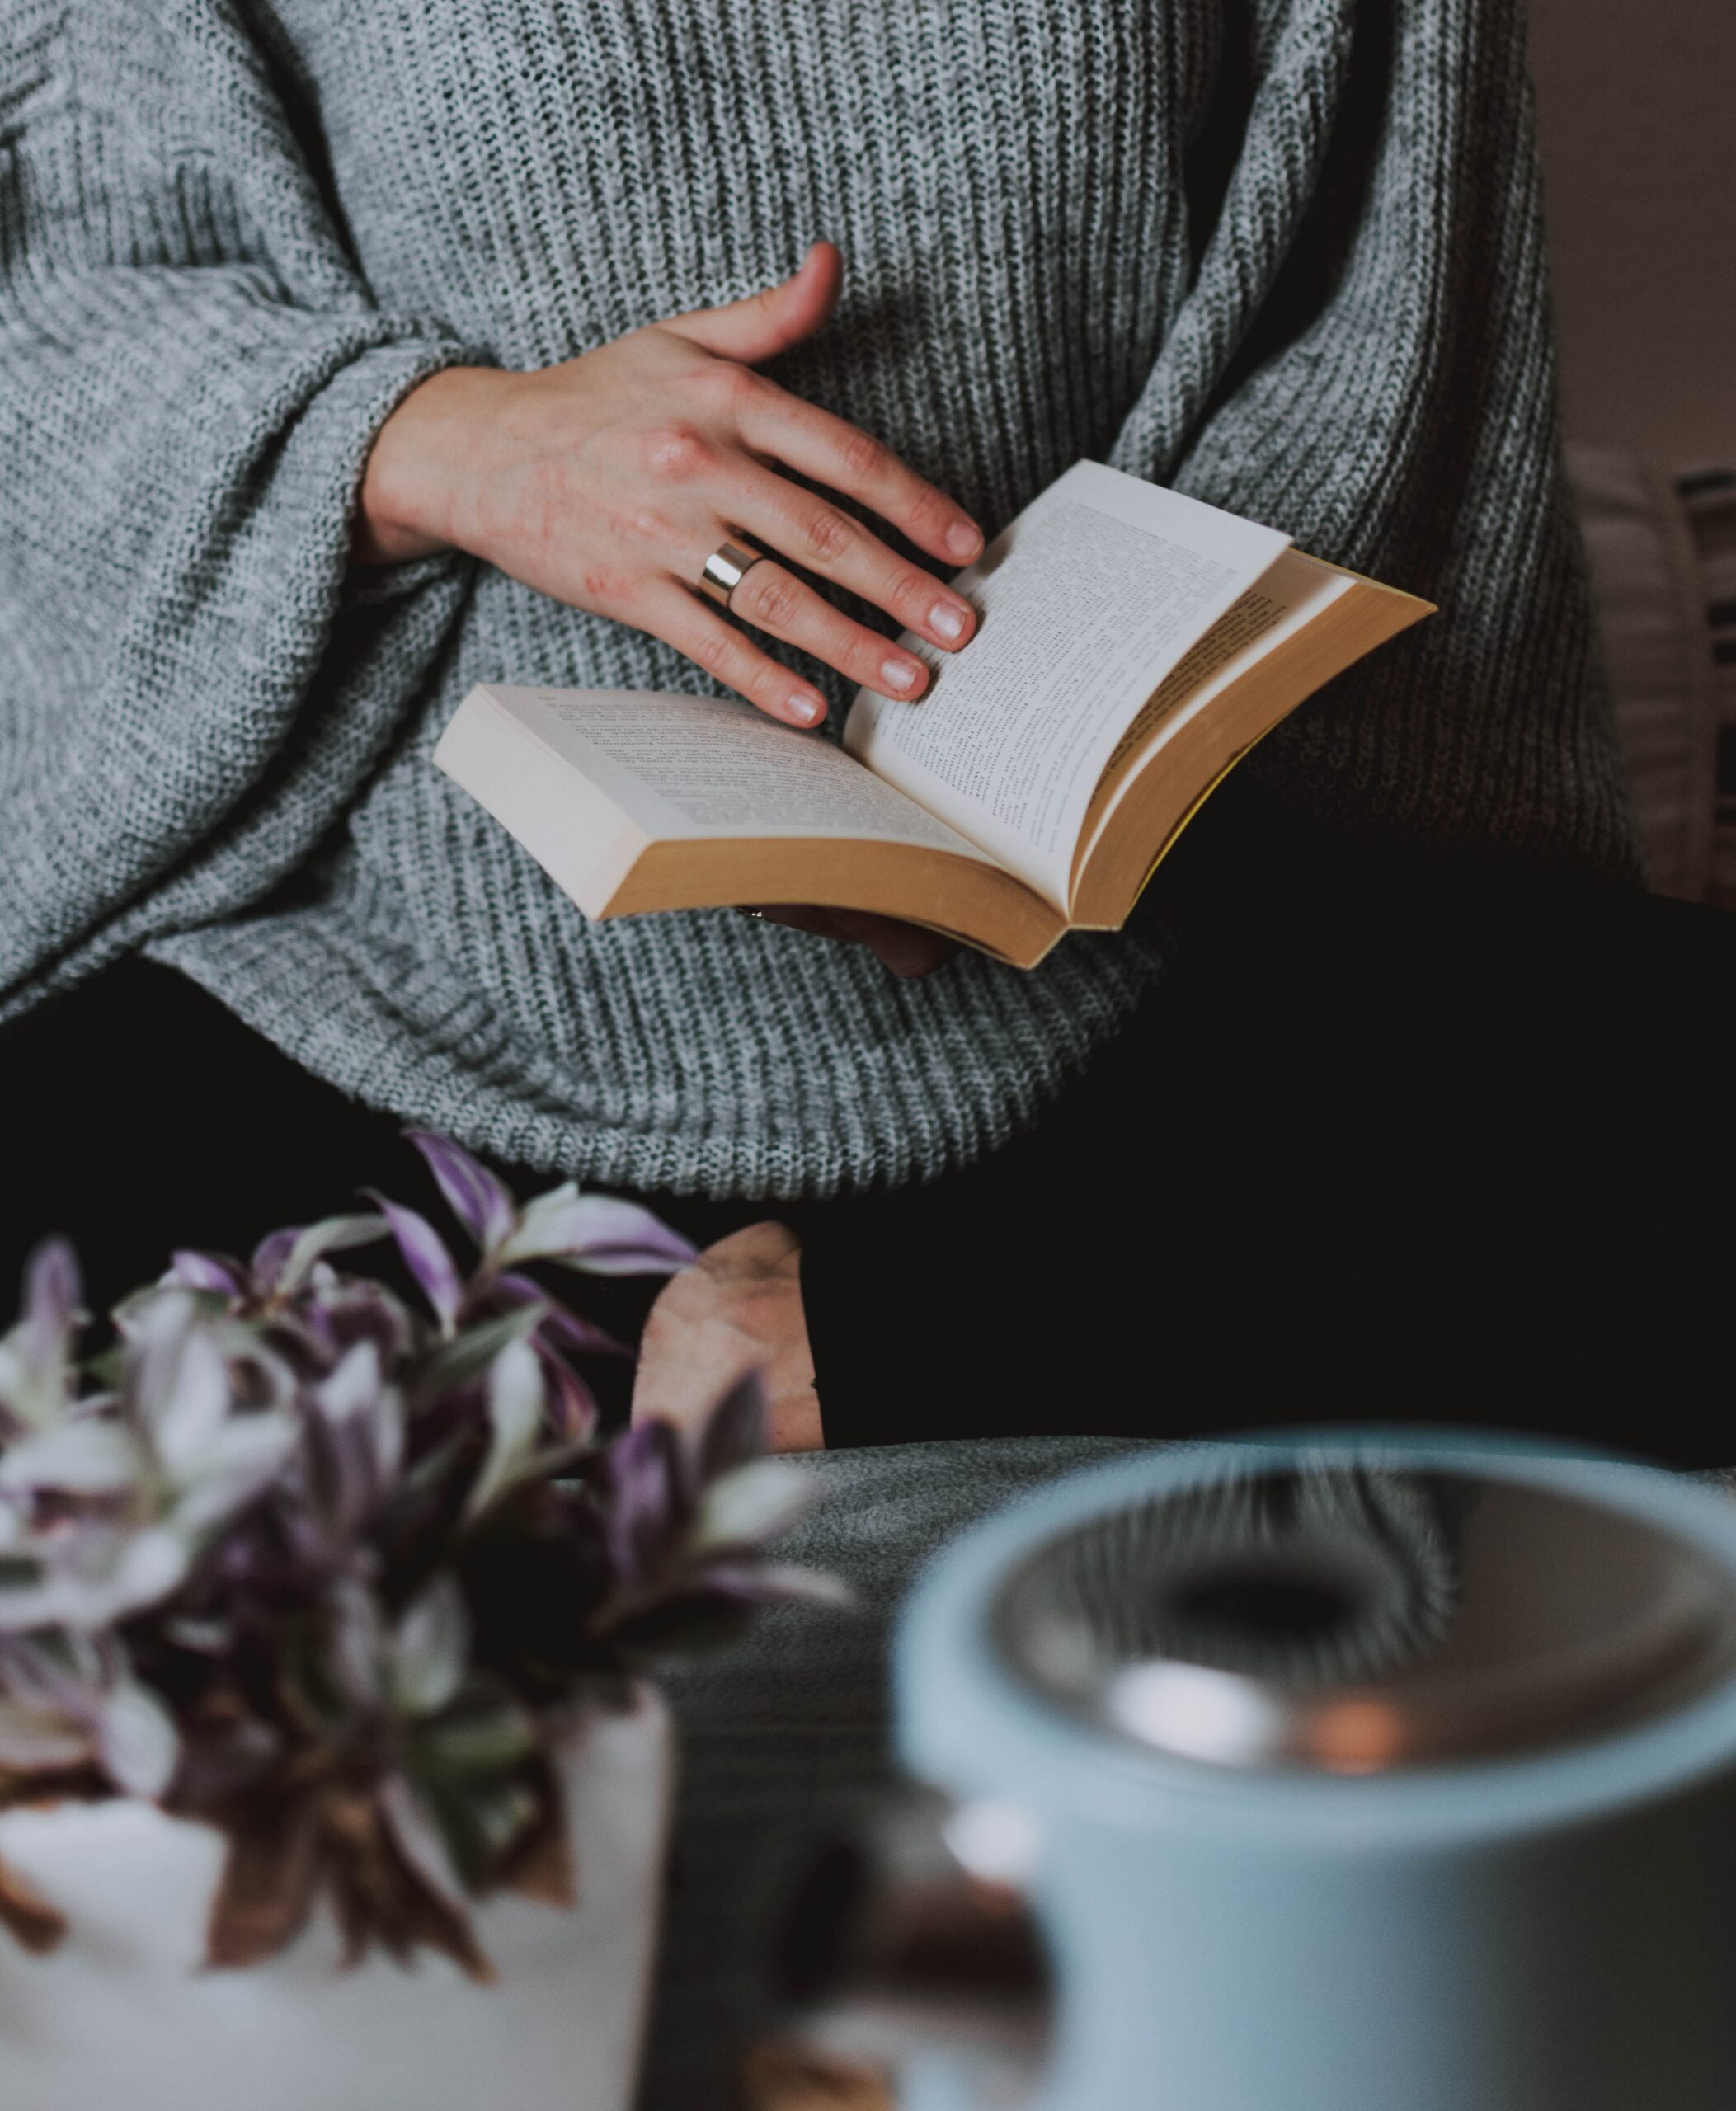 grey sweater girl with book